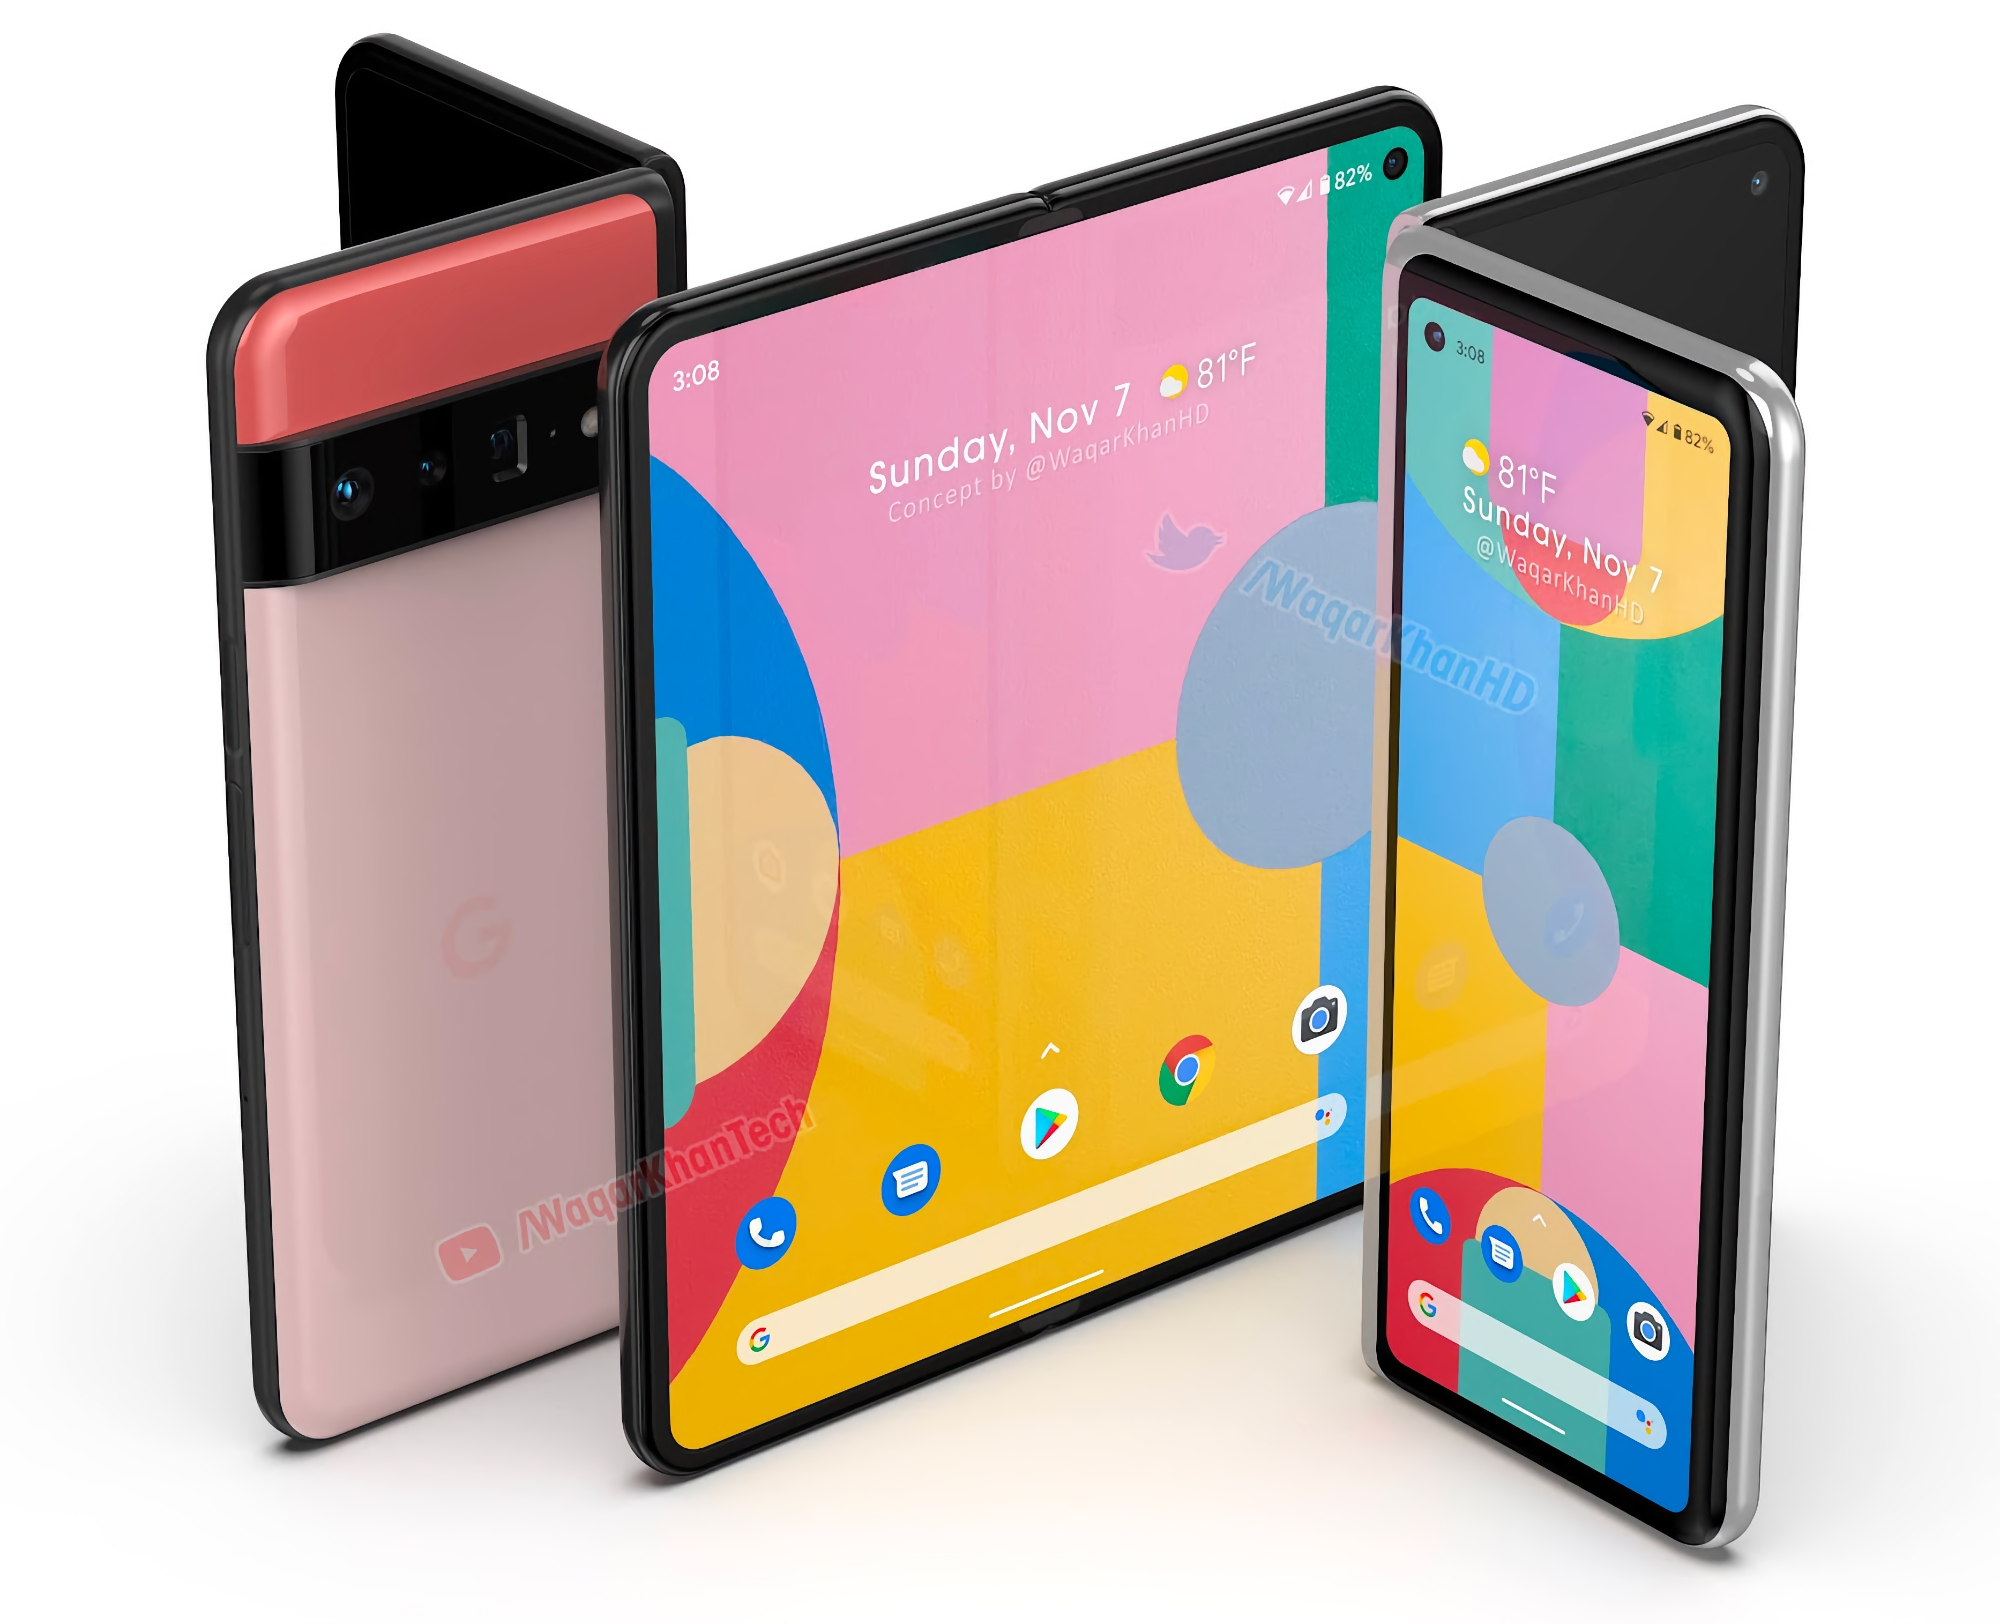 Source: Google Pixel foldable smartphone will hit the market at the end of 2022